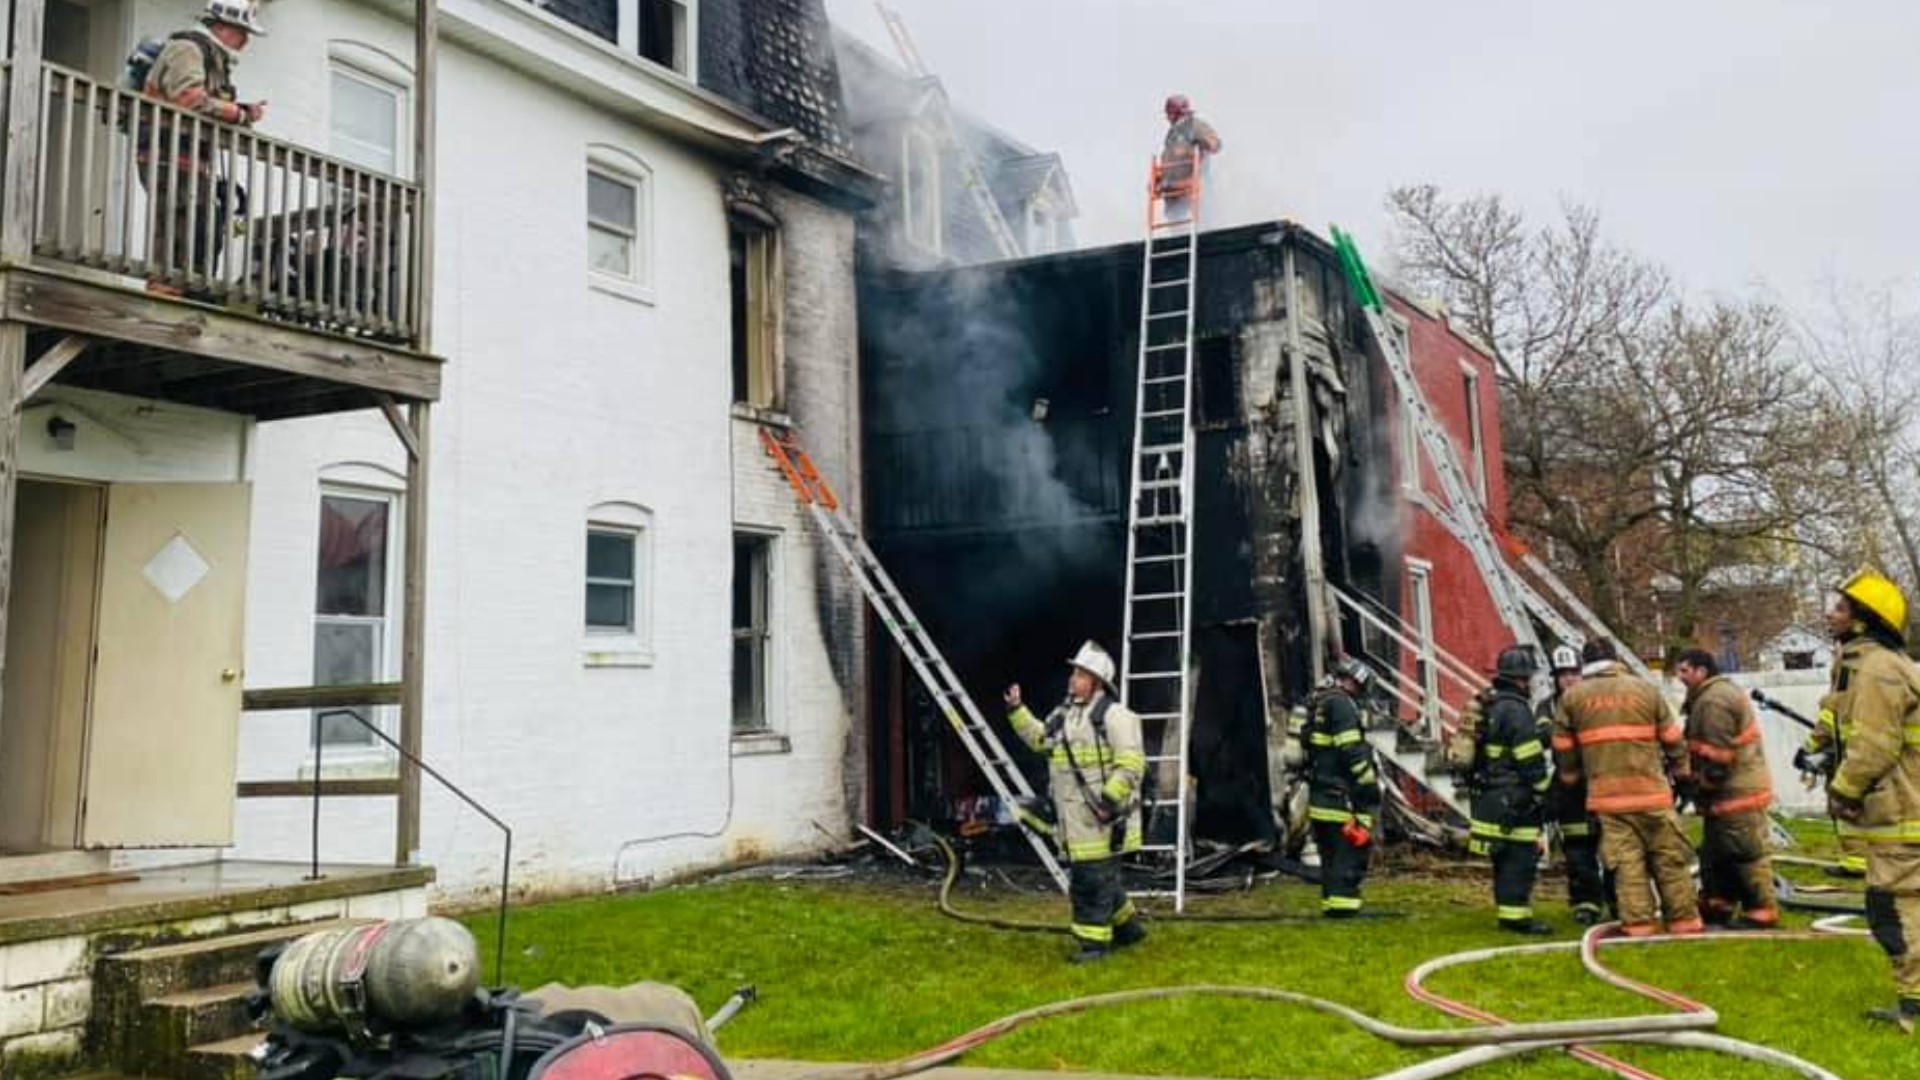 Officials say three separate apartments on the 200 block of East Market Street were involved in the fire that started around 8 a.m.